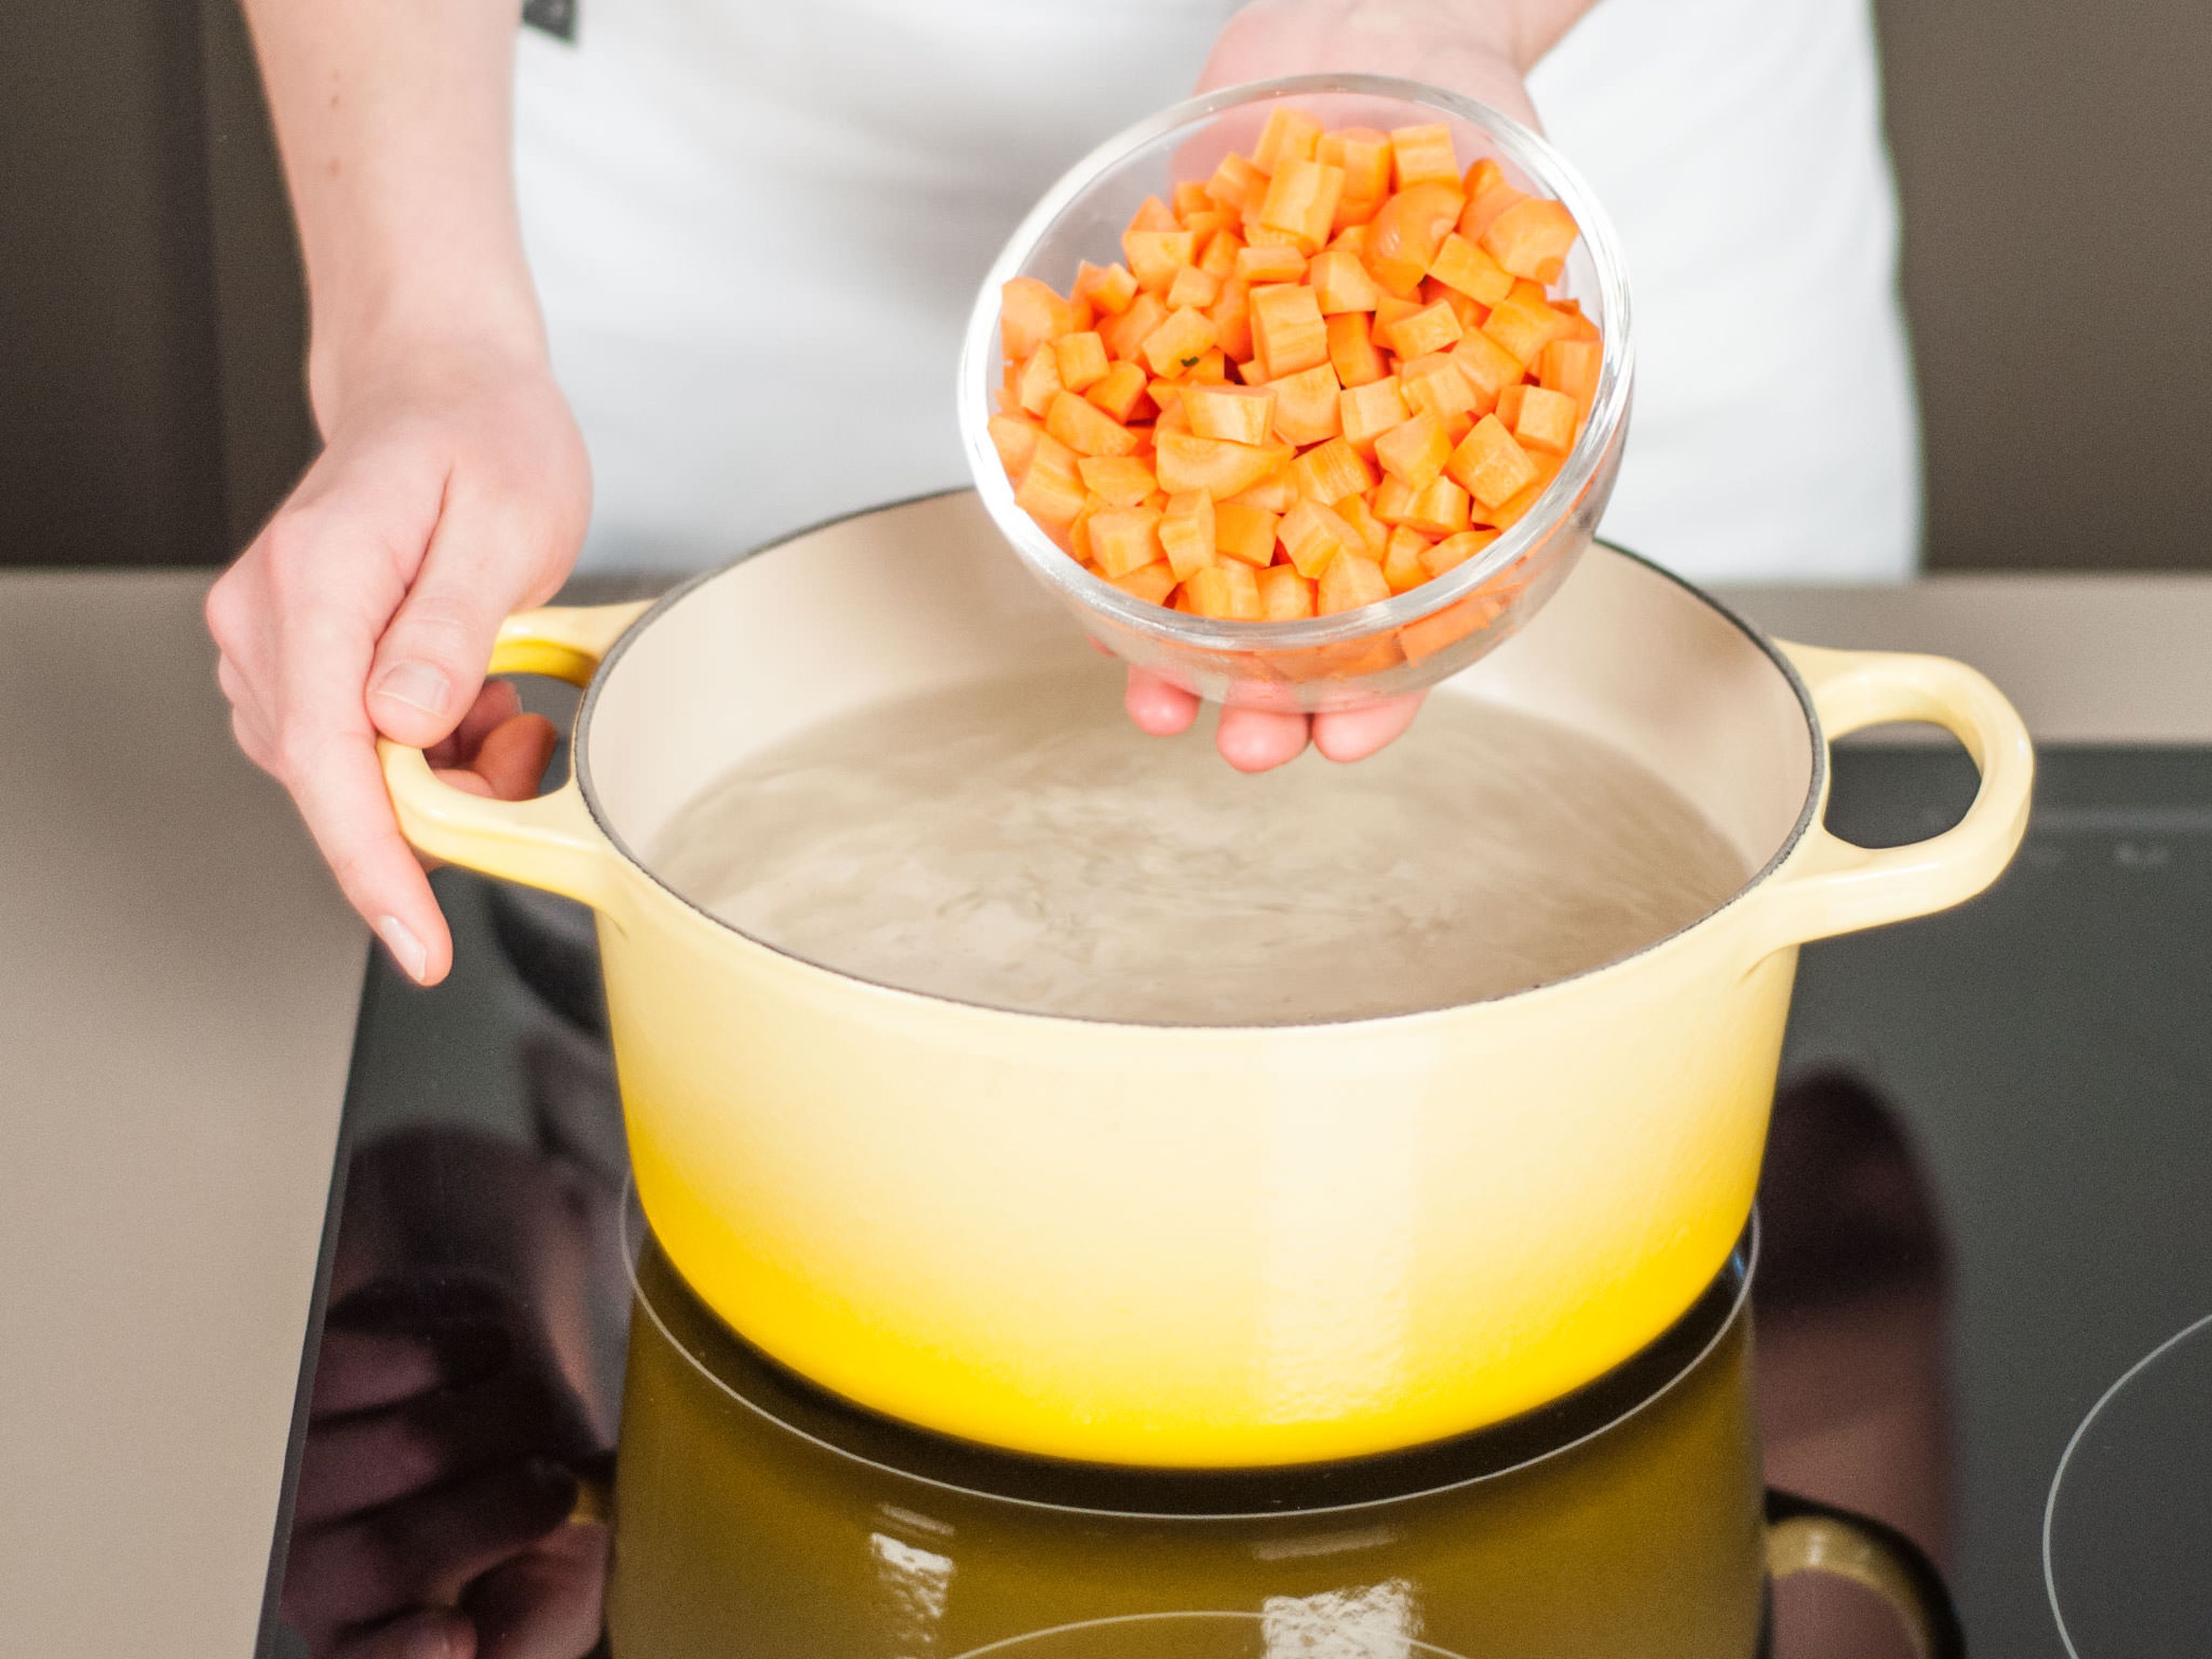 Add carrot cubes to a saucepan with lightly salted boiling water and blanch for approx. 3 – 4 min. Remove from water and immediately transfer to an ice bath.